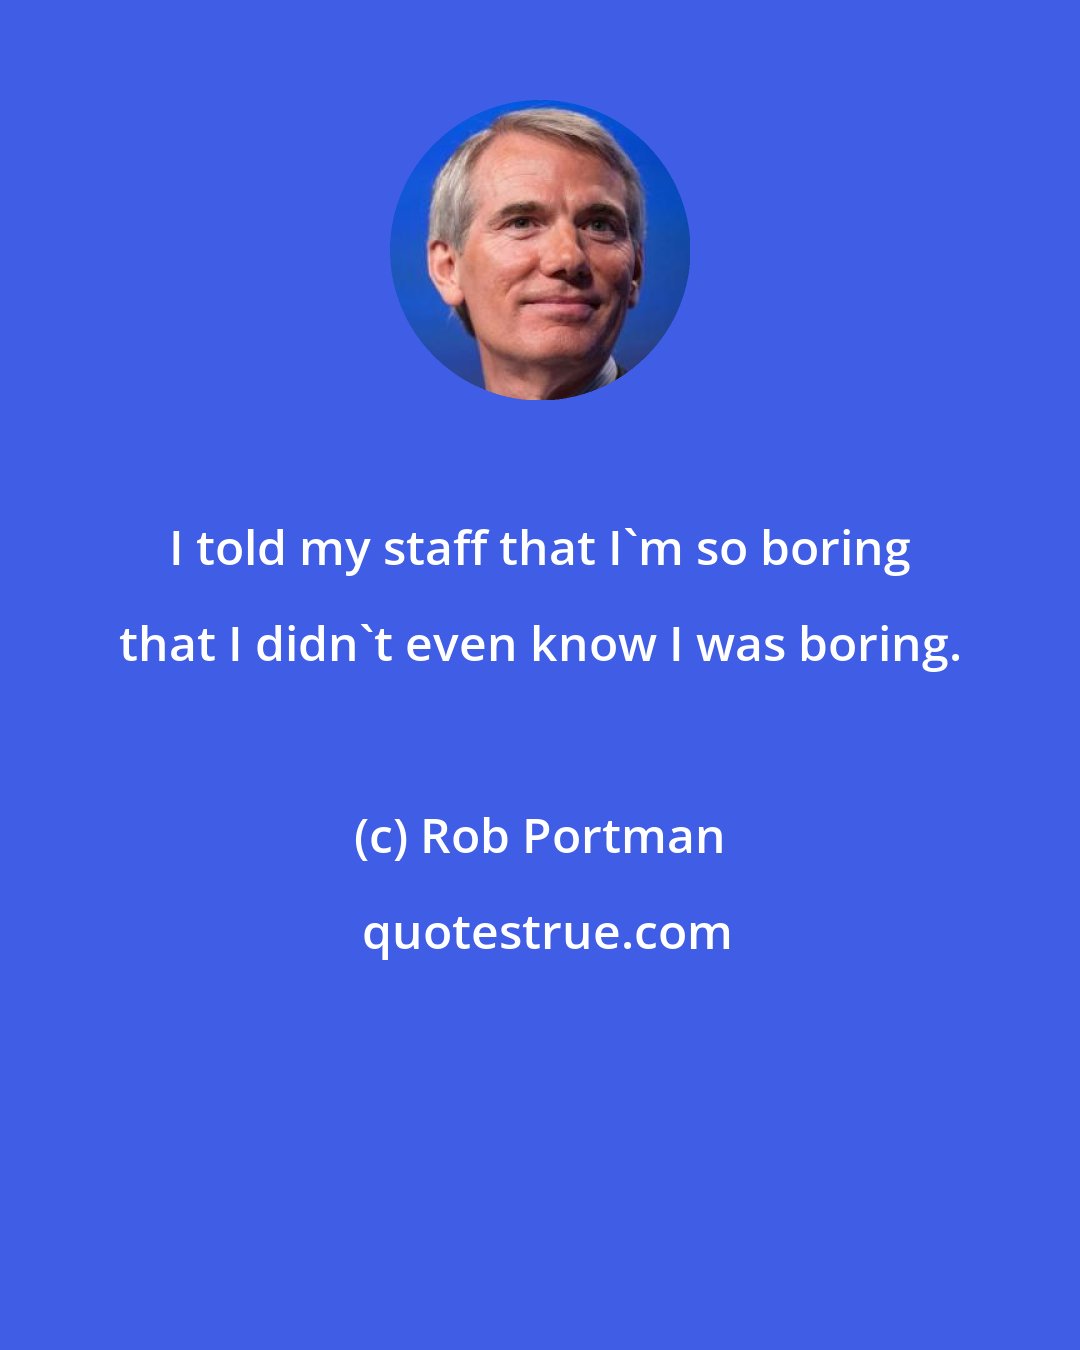 Rob Portman: I told my staff that I'm so boring that I didn't even know I was boring.